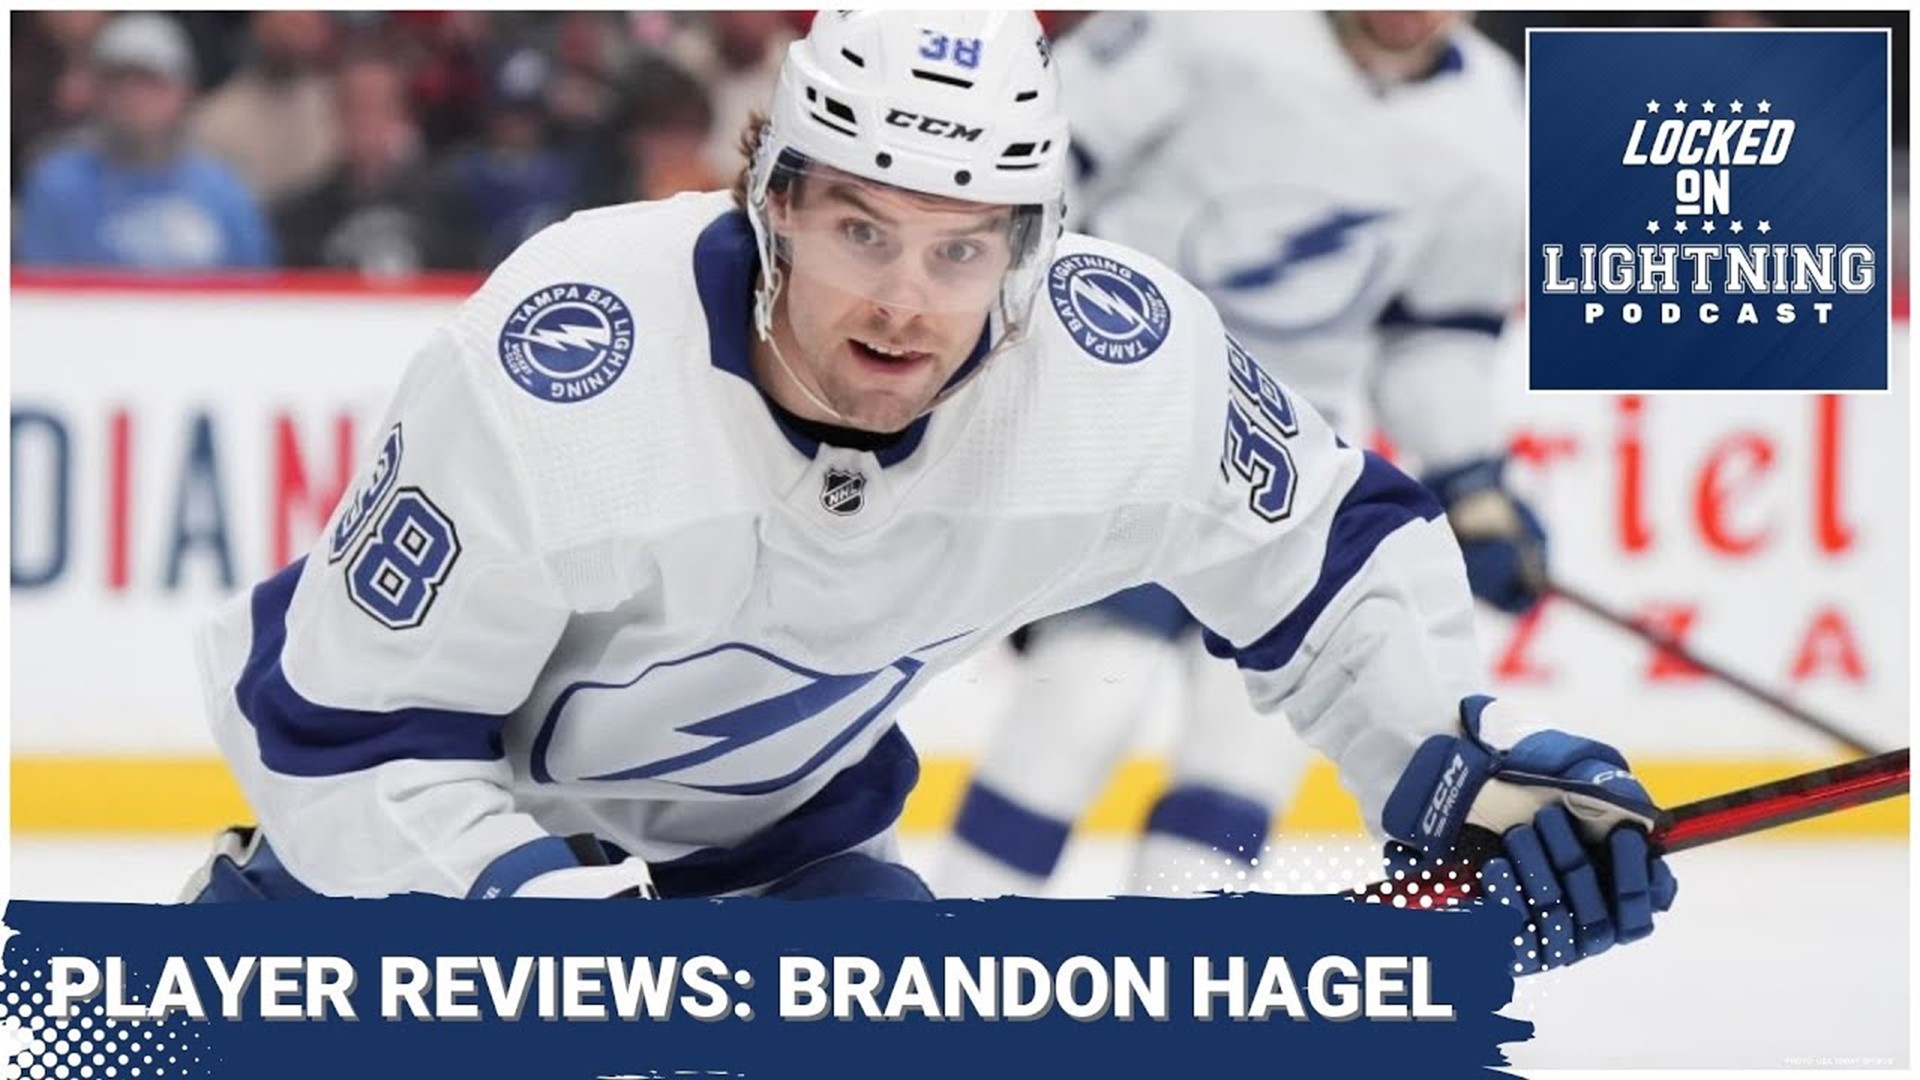 We look at Brandon Hagel's first full season in Tampa Bay as we truck on with our off-season player reviews. Hagel notched a 30-goal season along with 64 points.